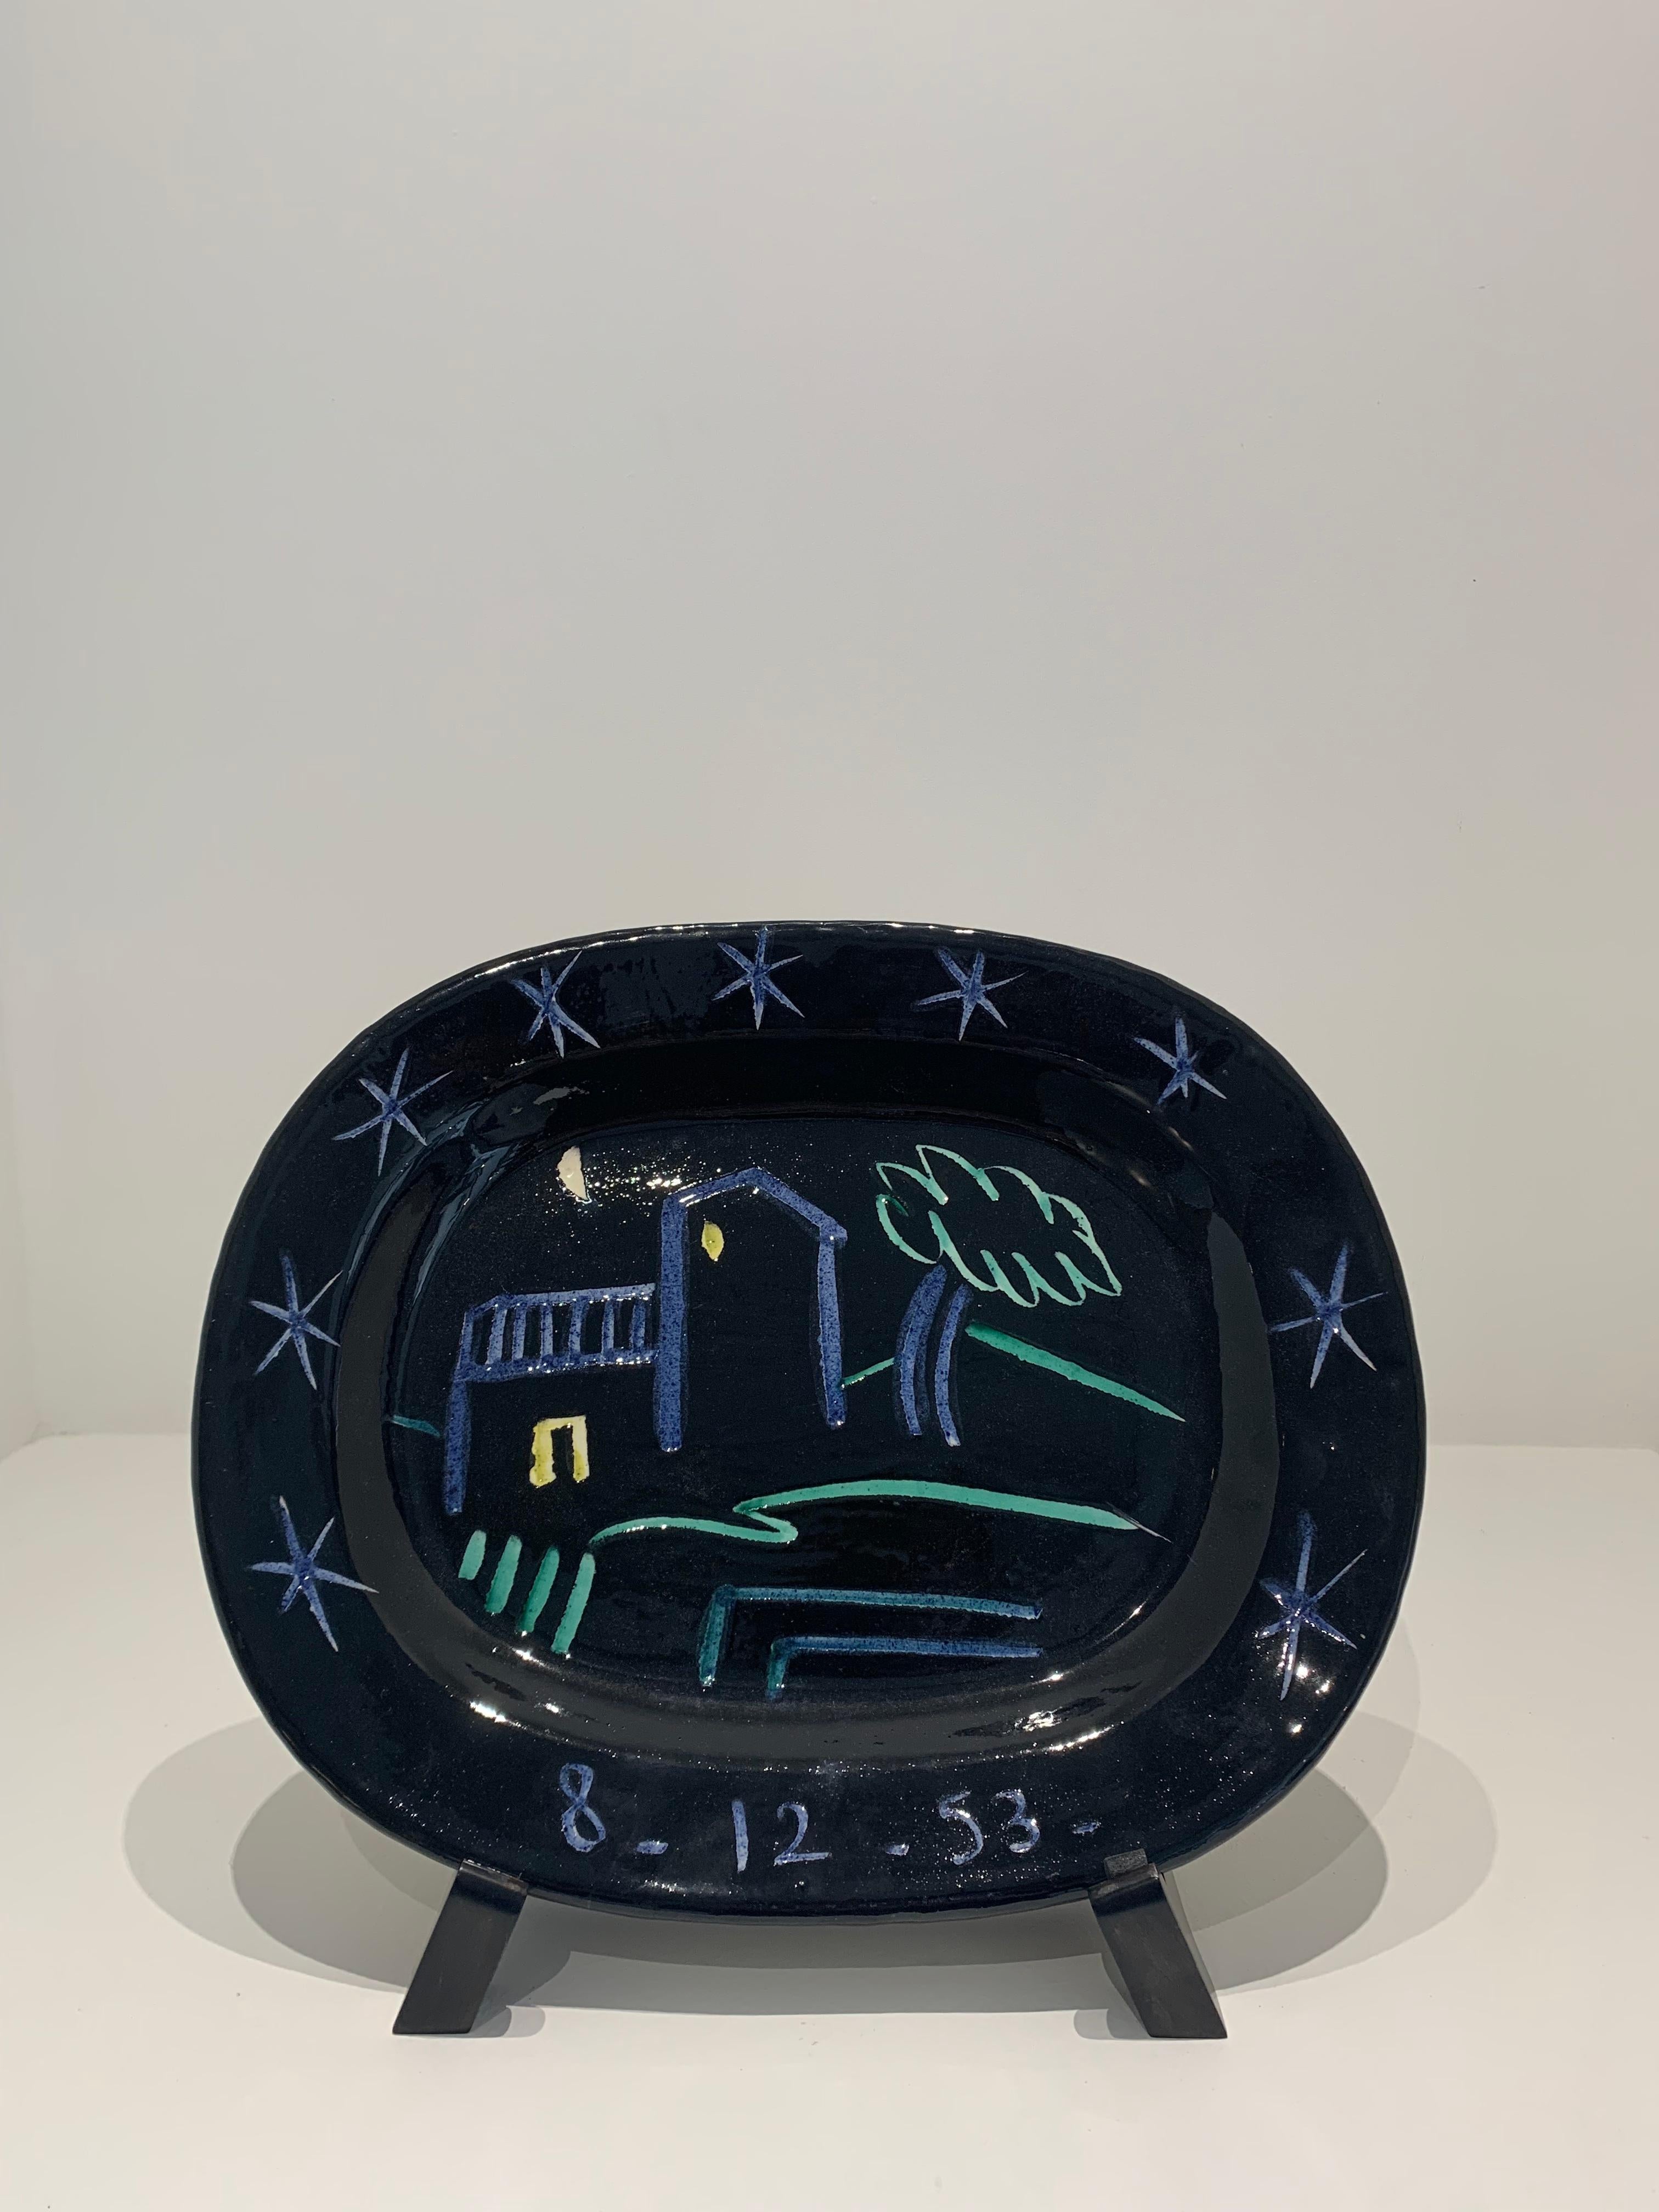 Paysage, Pablo Picasso, 1950's, Plate, Design, Ceramic, Figuratif, Editions

Paysage
Ed.200 pcs
08.12.1953
White earthenware clay, decoration in engobes, knife engraved, under glaze
31.5 x 38 cm
Dated lower centre : 8.12.53 ; Stamped and inscribed